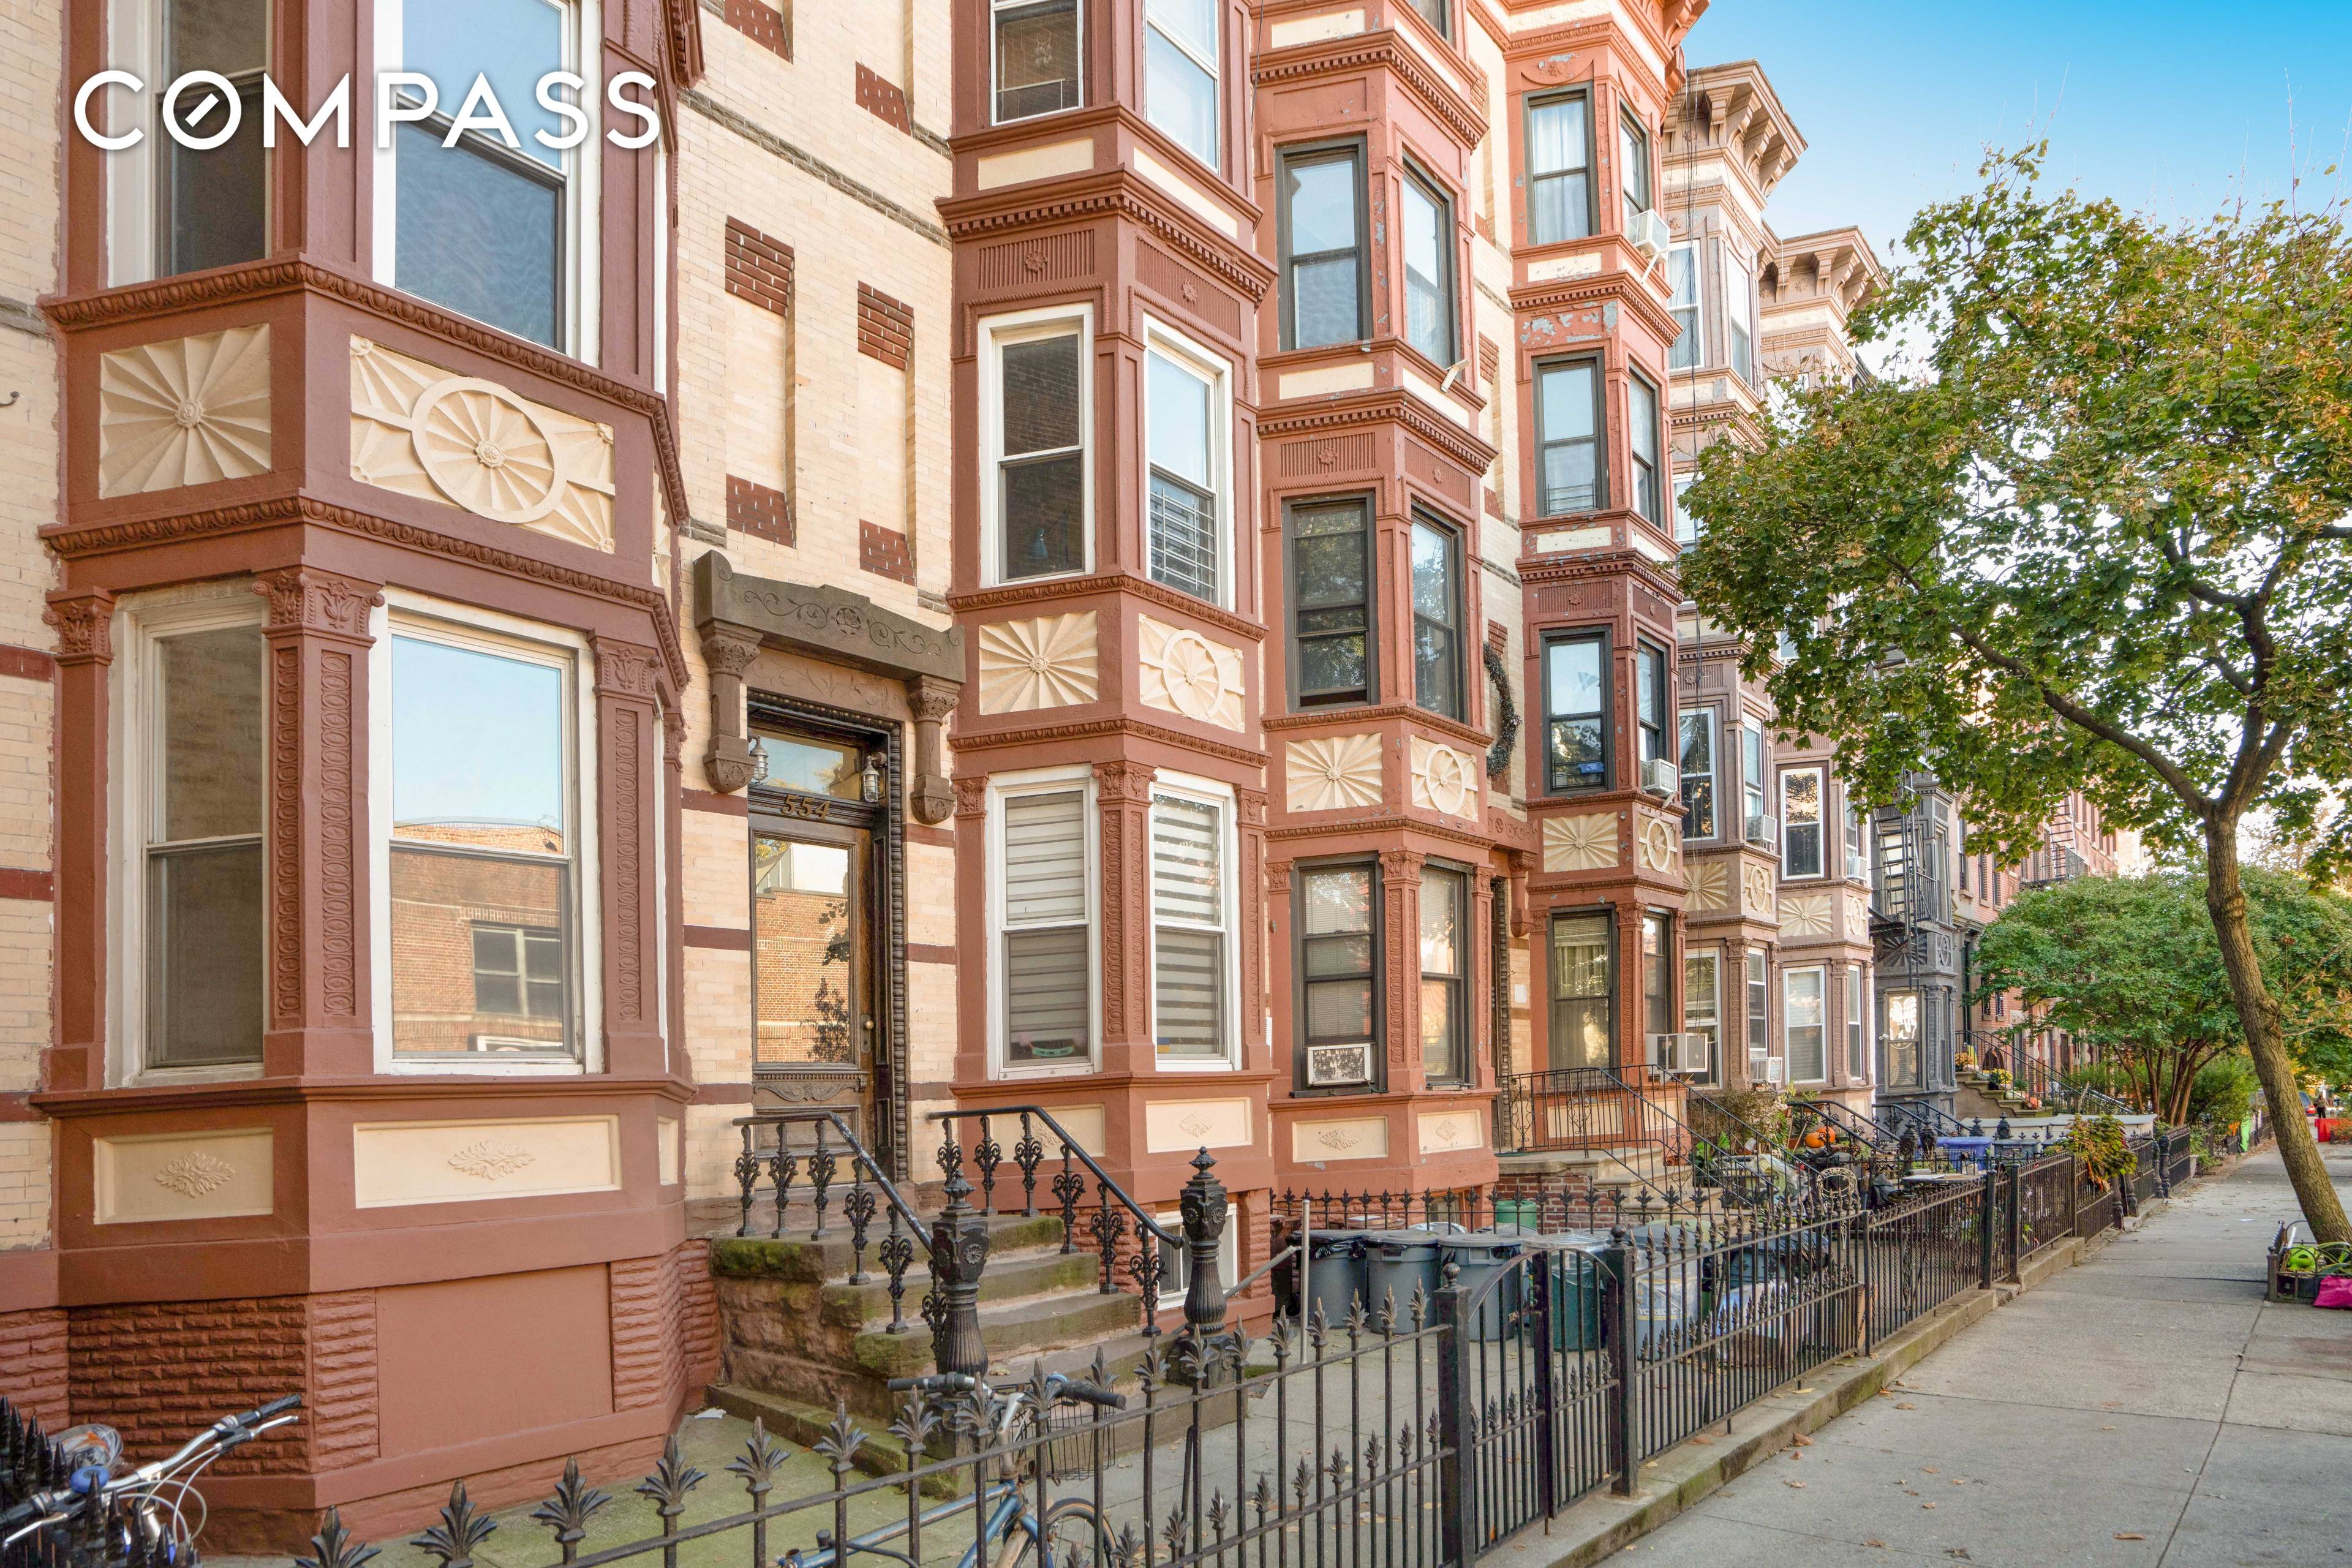 Located within the 40 block residential district of Park Slope 554 11th St.